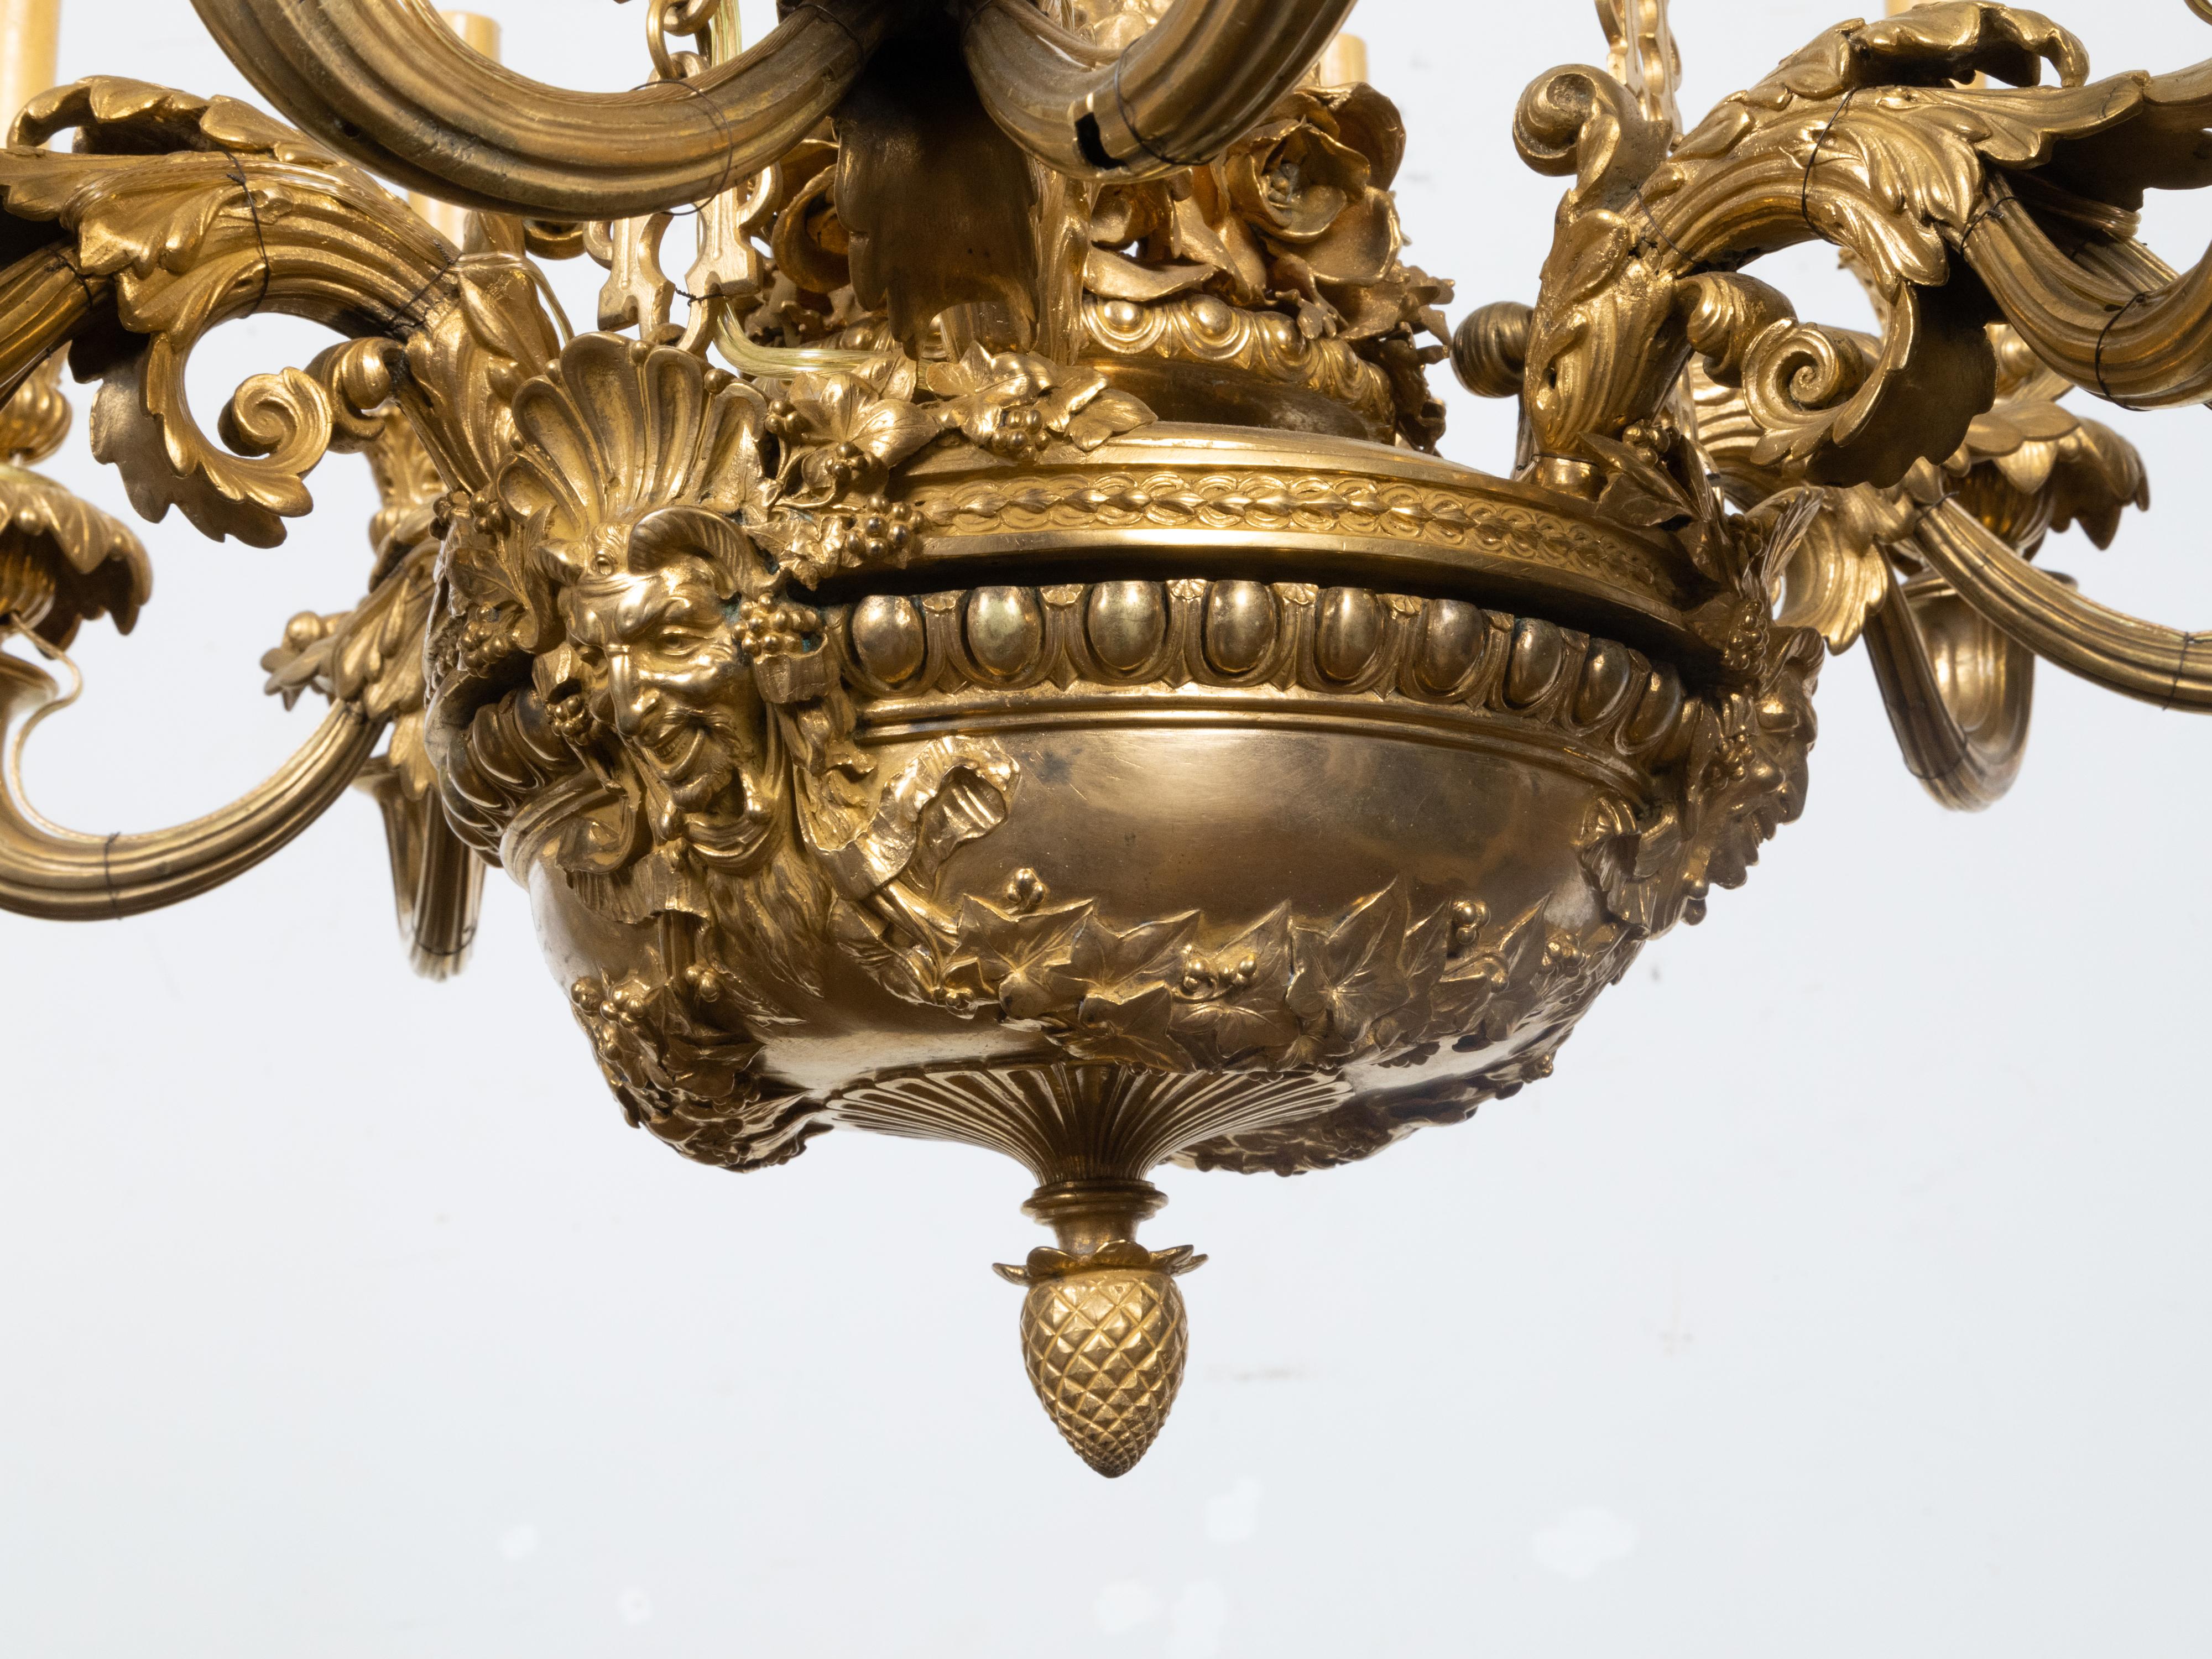 French Napoléon III 19th Century Gilt Bronze 12 Light Chandelier with Mascarons For Sale 9